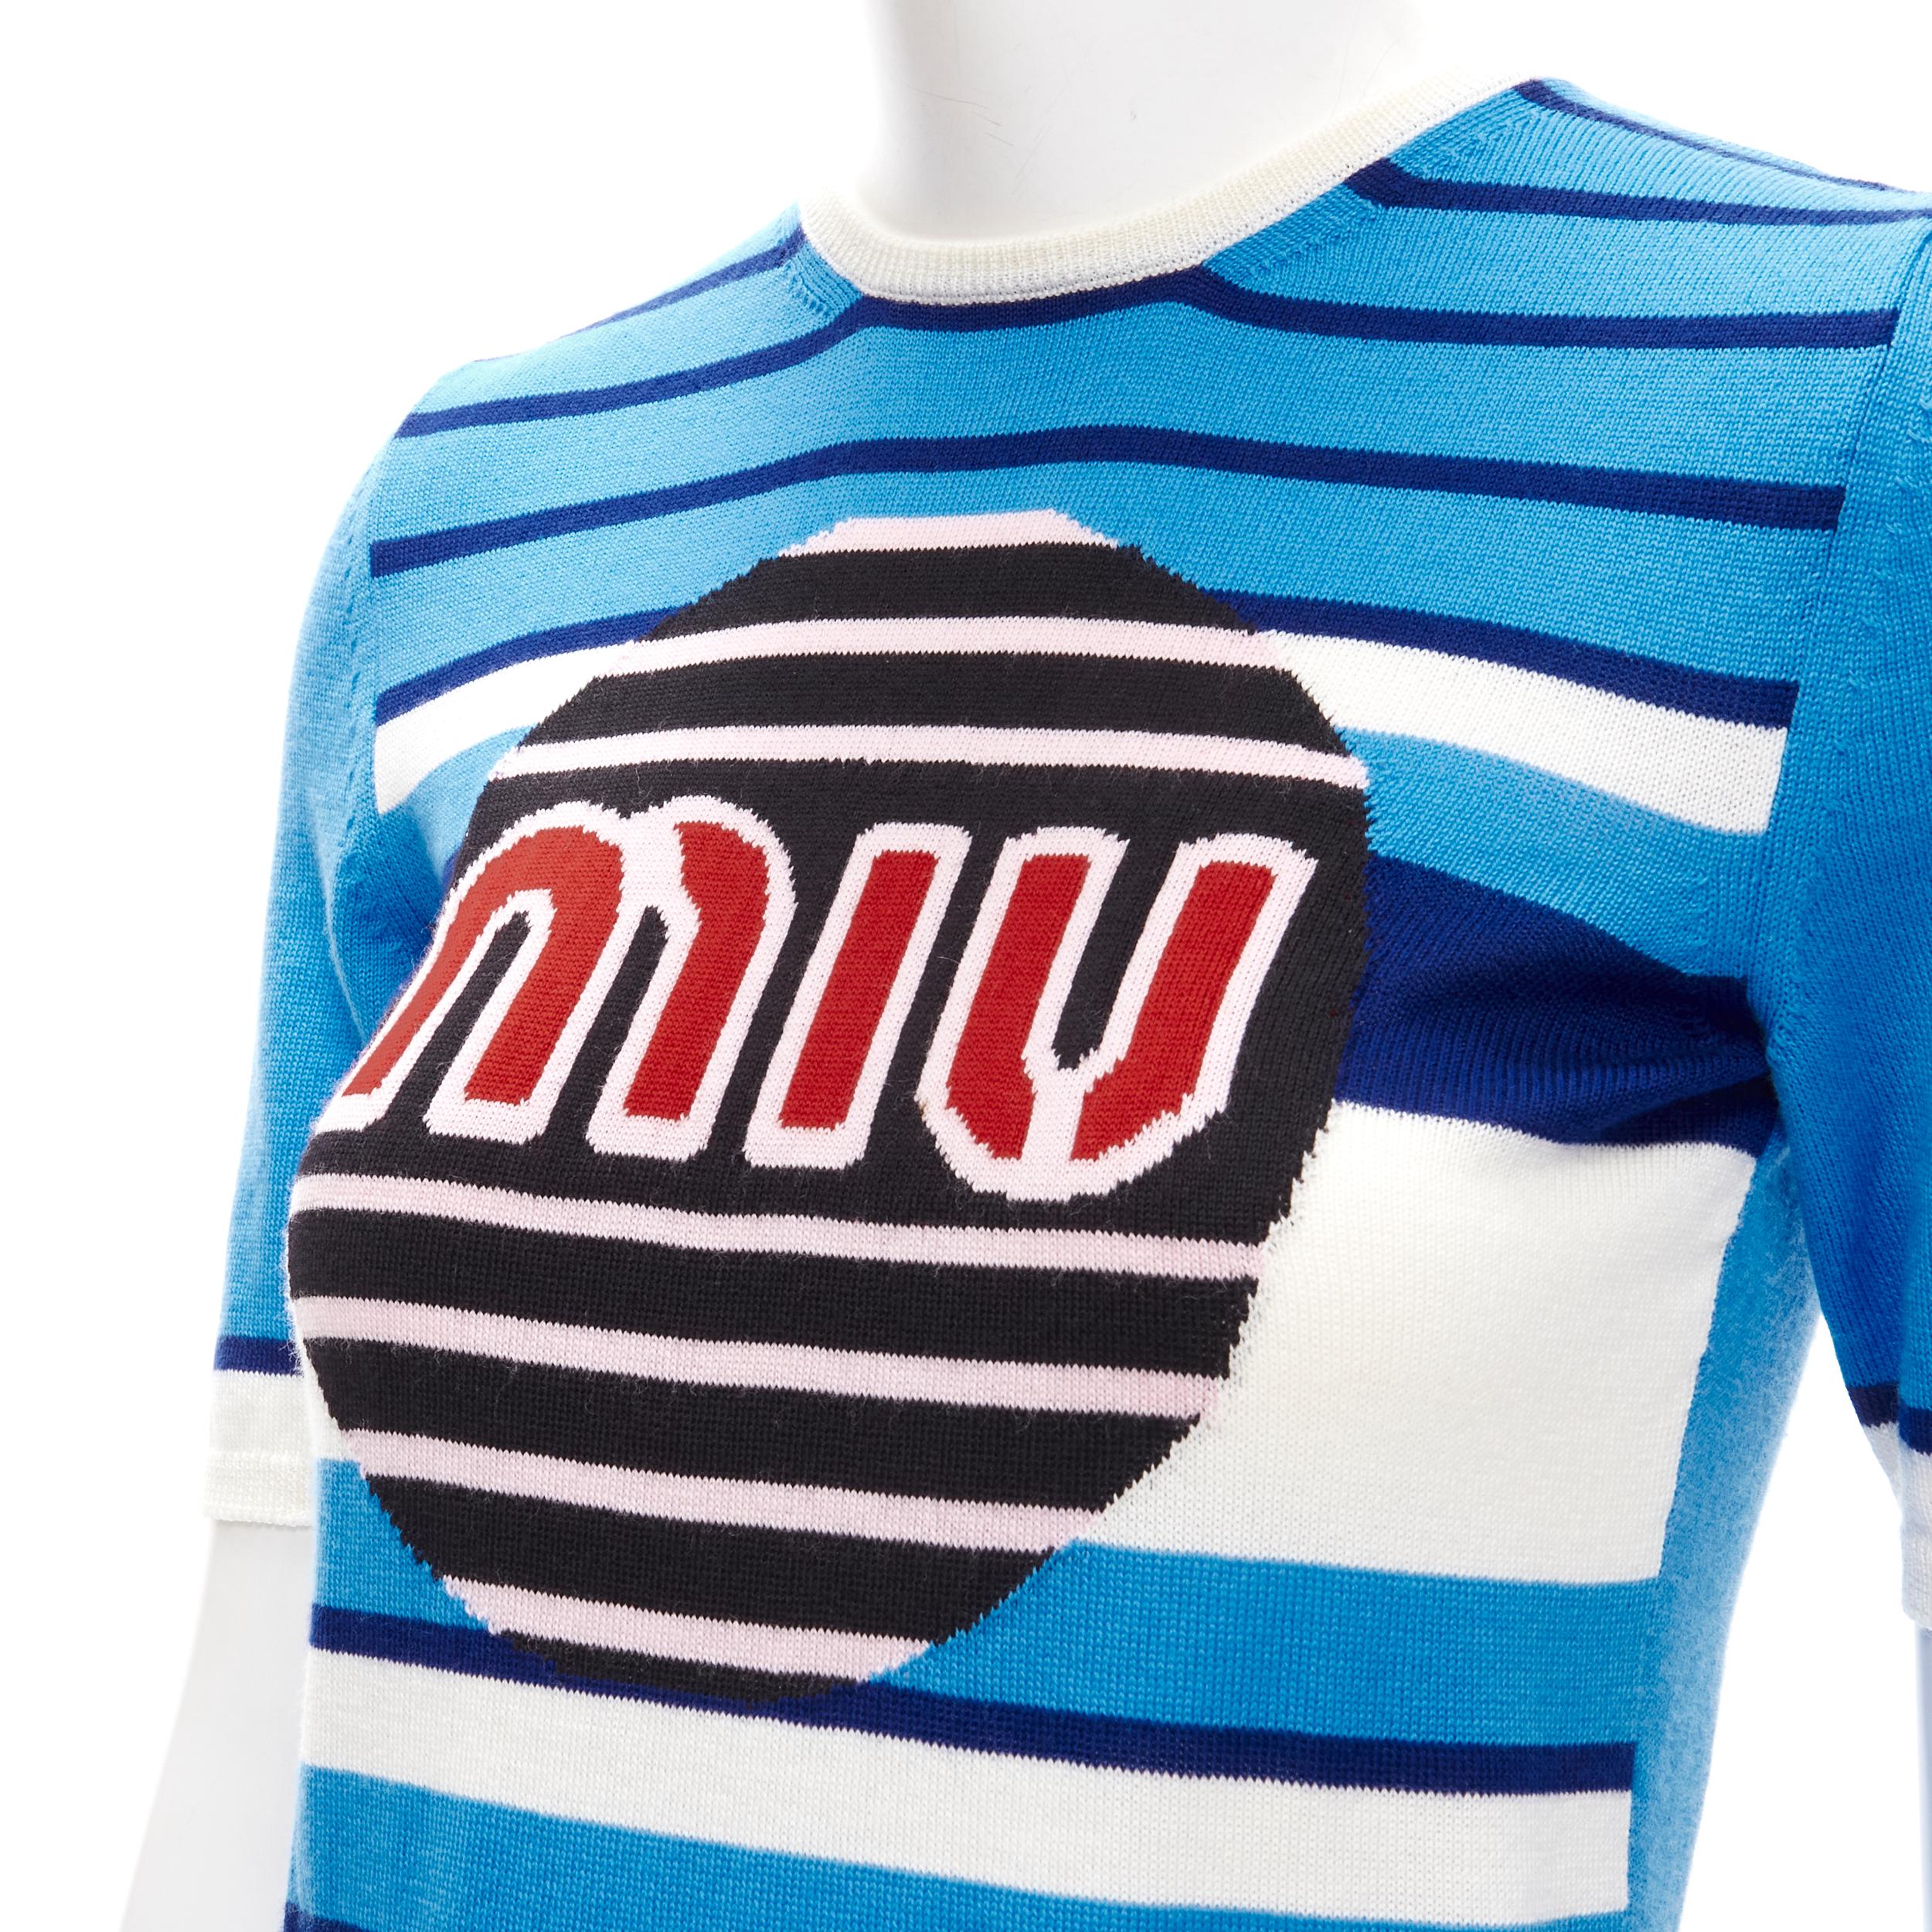 MIU MIU blue graphic circle logo striped knitted sweater top S 
Reference: ANWU/A00707 
Brand: Miu Miu 
Designer: Miuccia Prada 
Material: Feels like wool 
Color: Blue 
Pattern: Striped 
Made in: Italy 

CONDITION: 
Condition: Excellent, this item